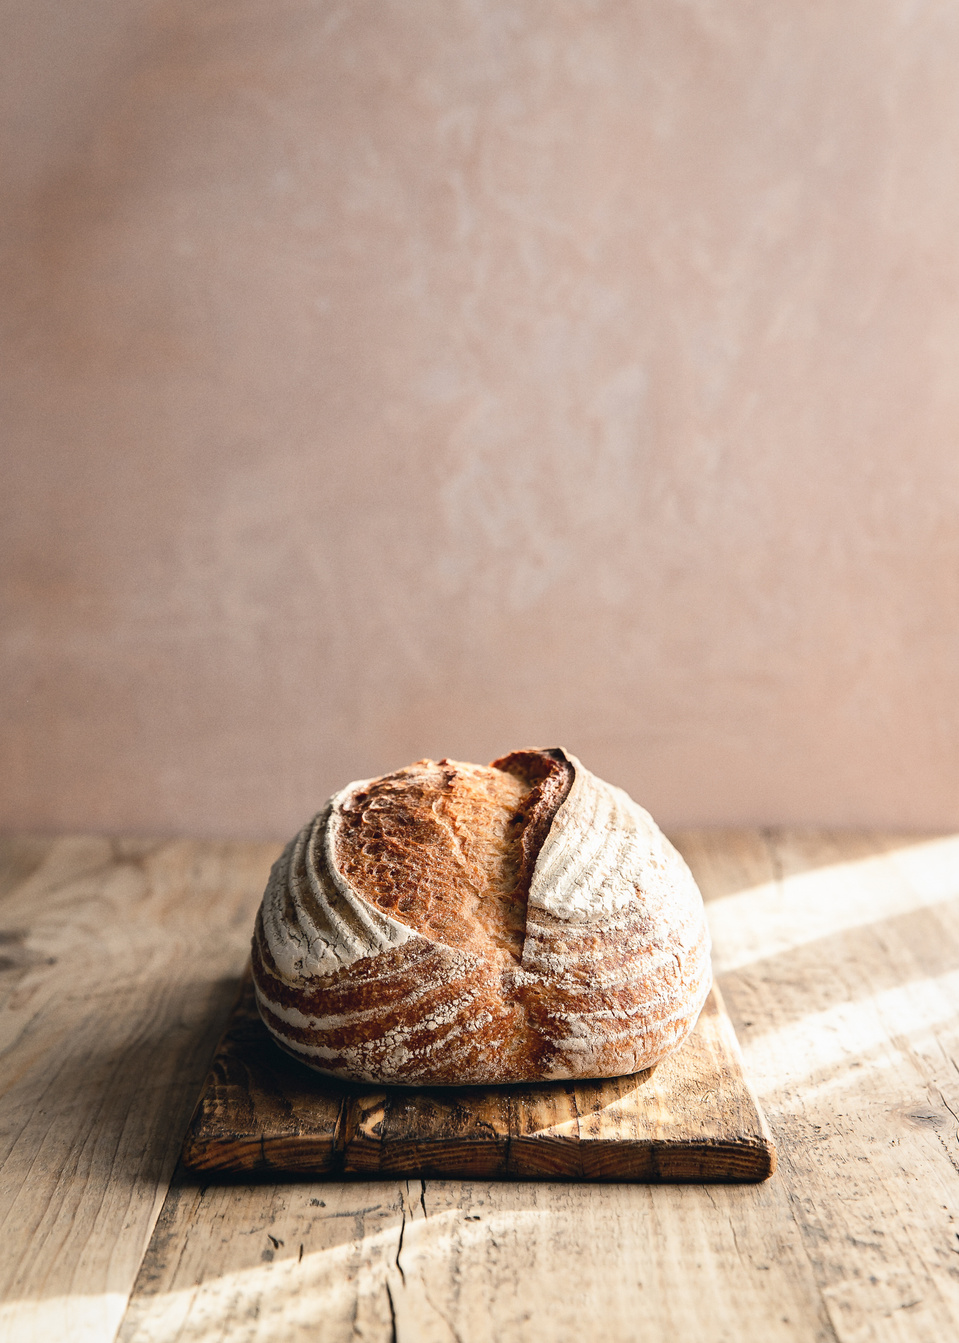 Elise Humphrey - food photographer - loaf of sourdough bread on a wooden chopping board with a pink plaster background